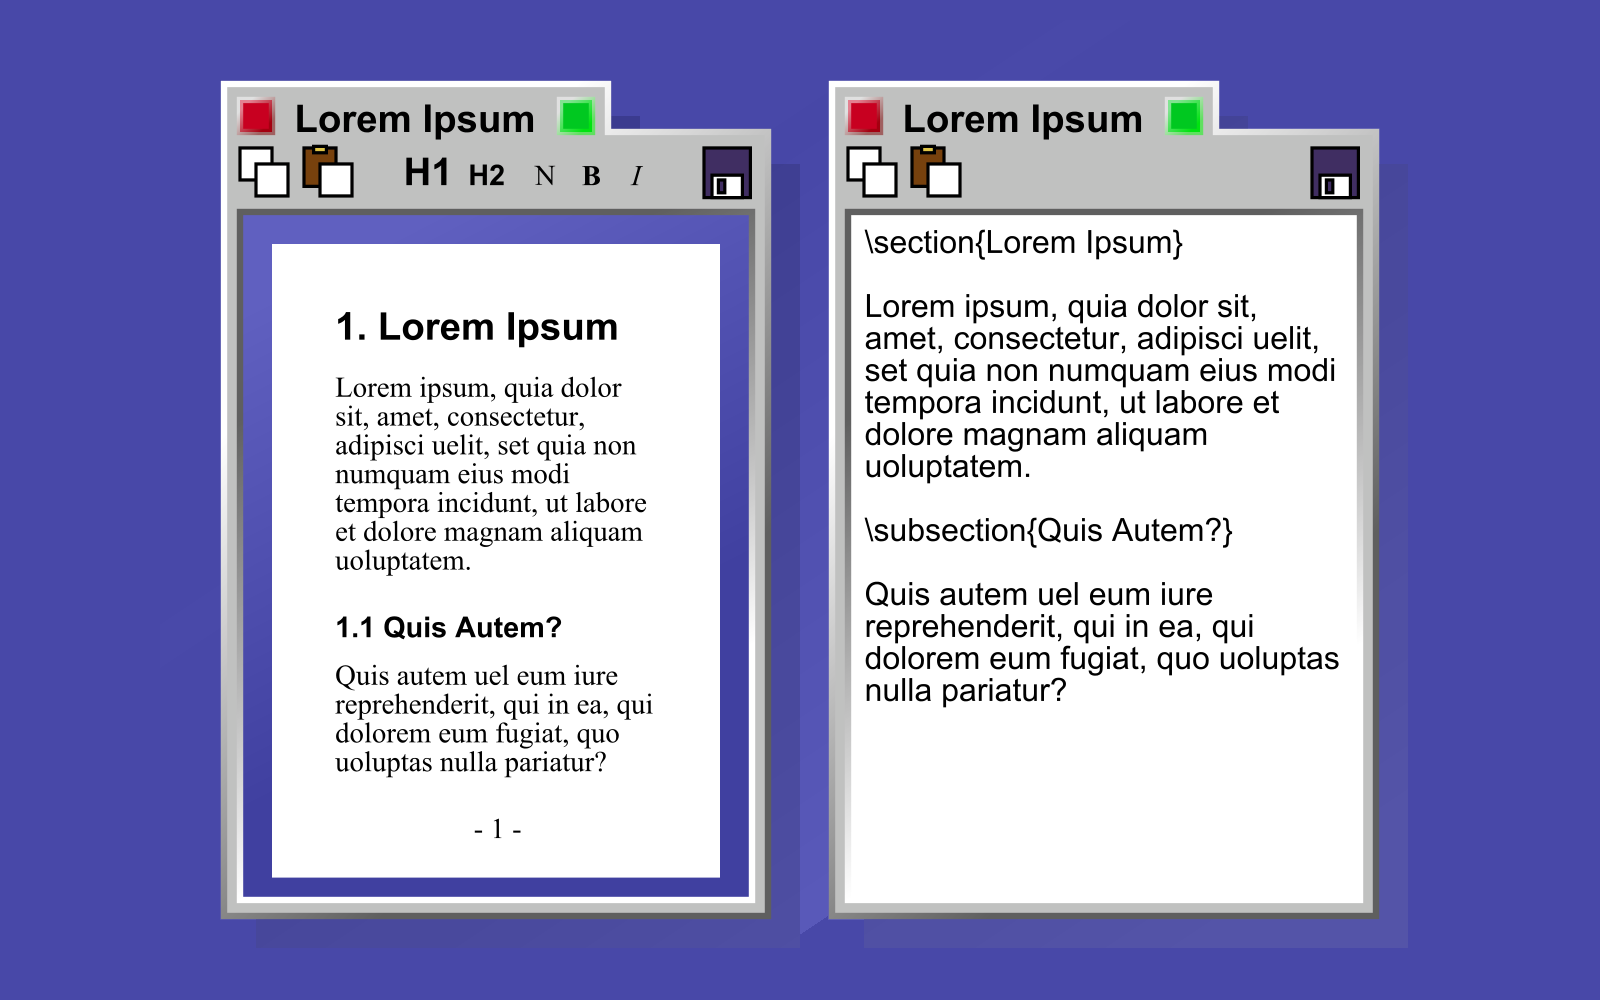 What does “Lorem Ipsum” really mean? A misunderstanding that lasted eighty years